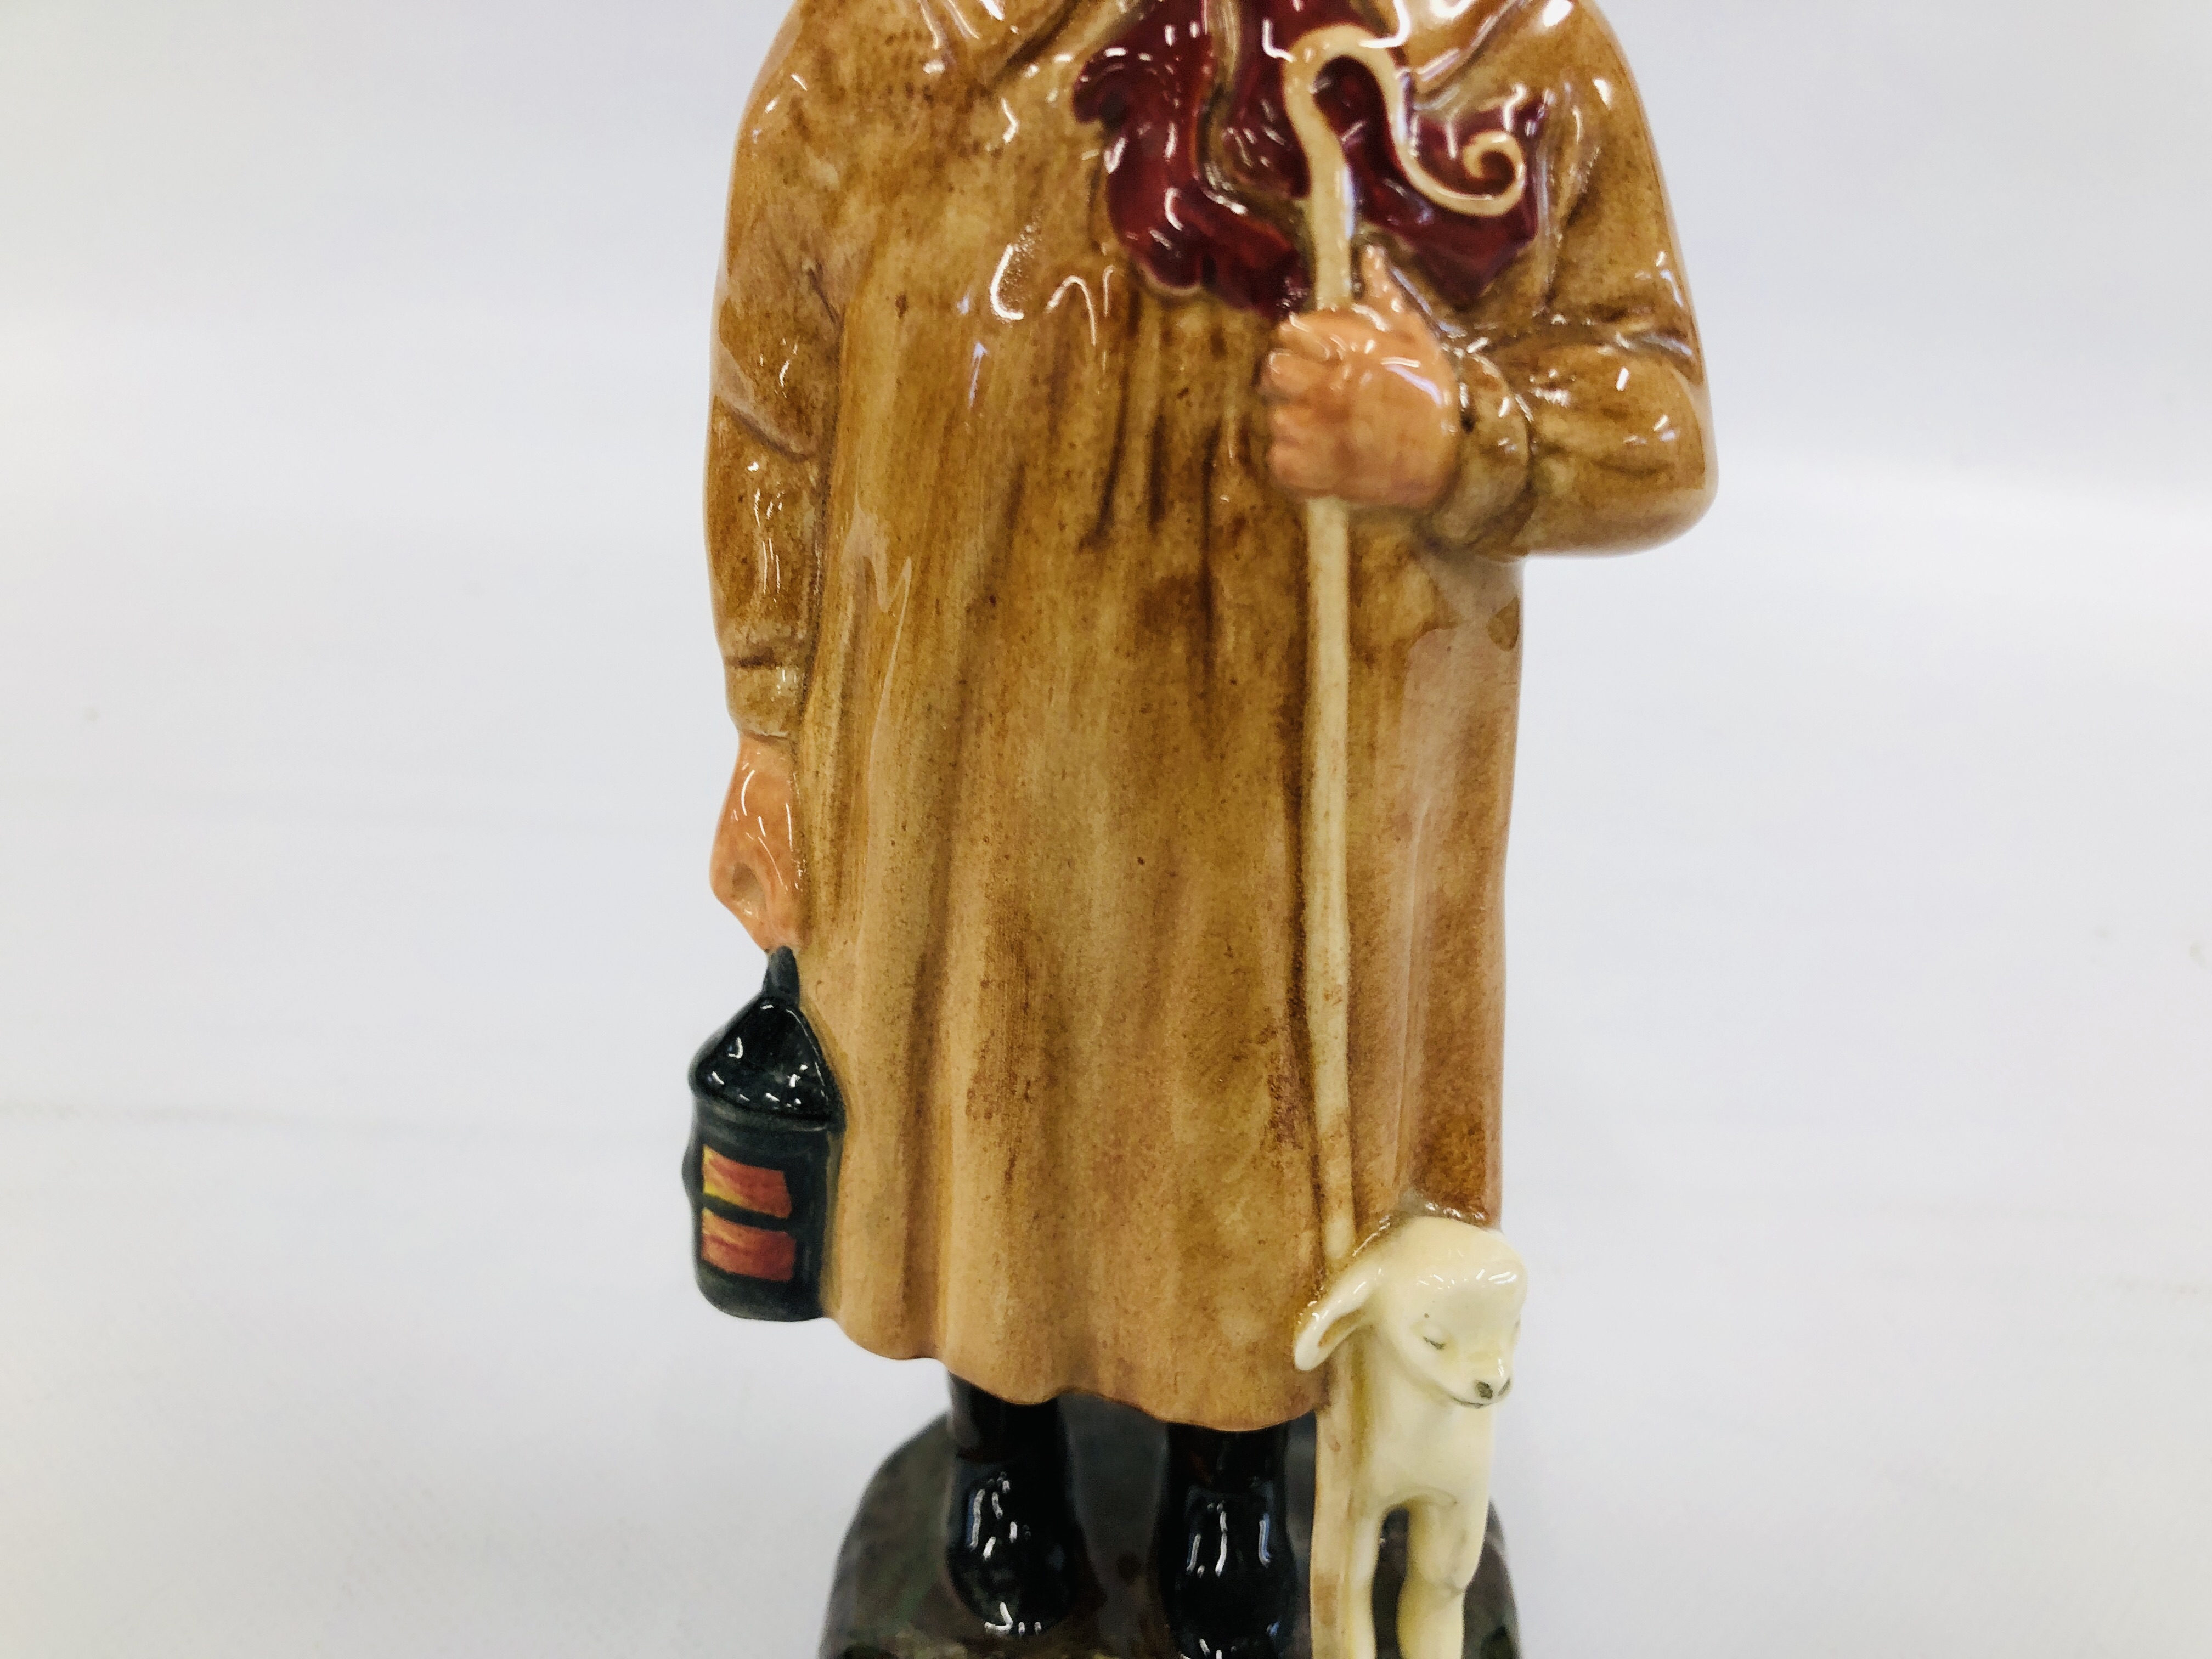 ROYAL DOULTON FIGURE OF "THE SHEPHERD" H.N. 1975 R NO. 842485 22CM H. - Image 3 of 7